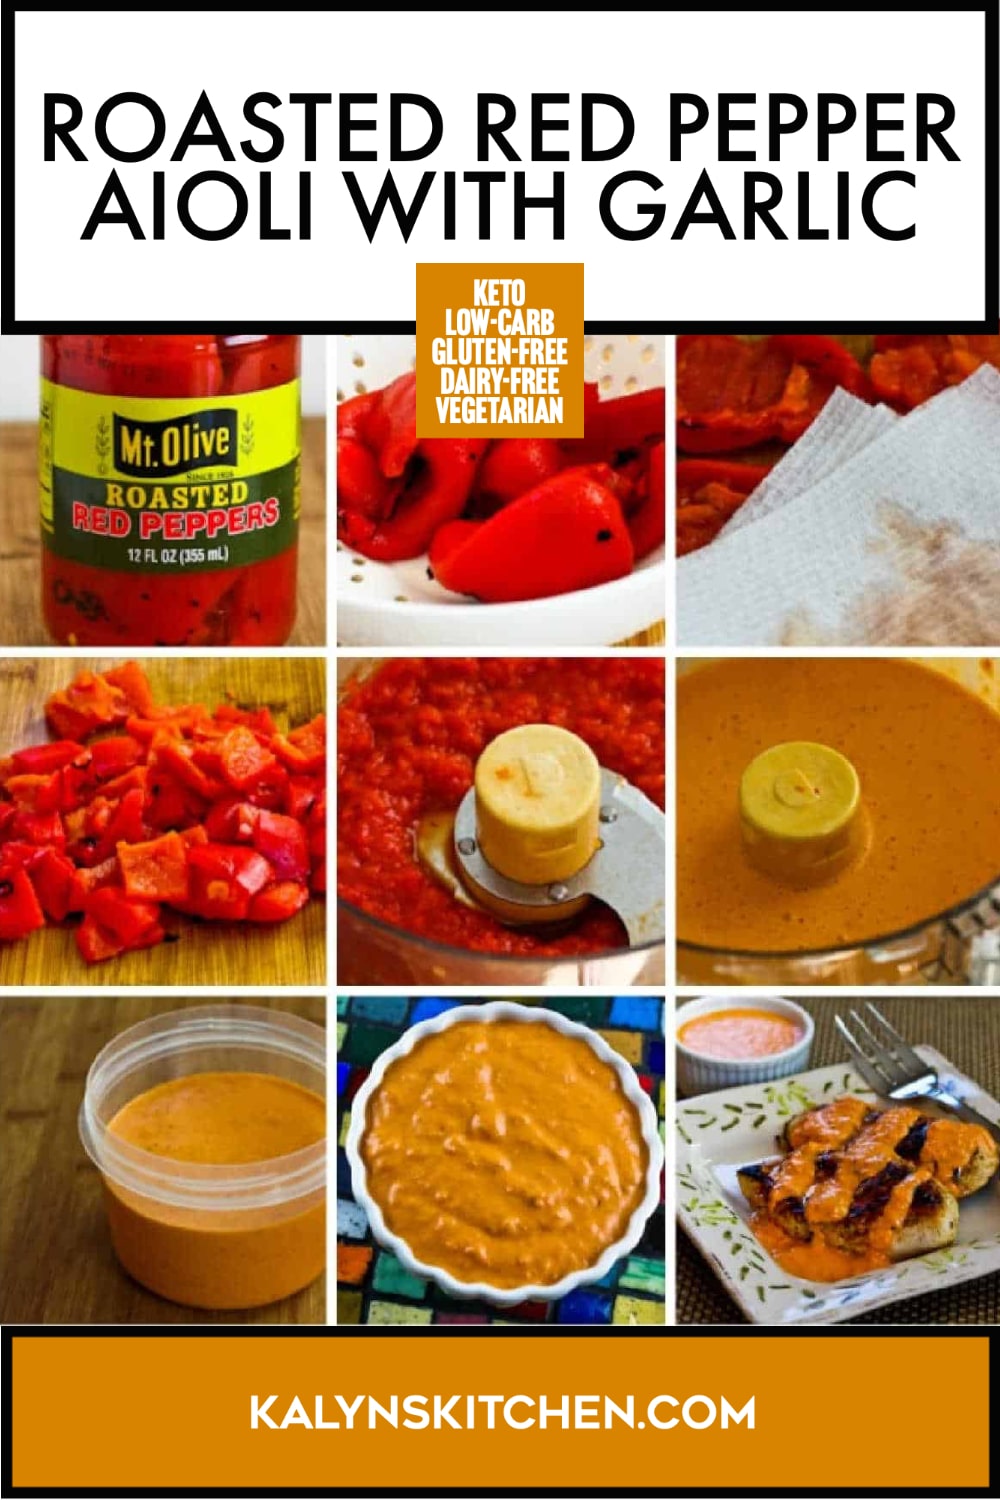 Pinterest image of Roasted Red Pepper Aioli with Garlic